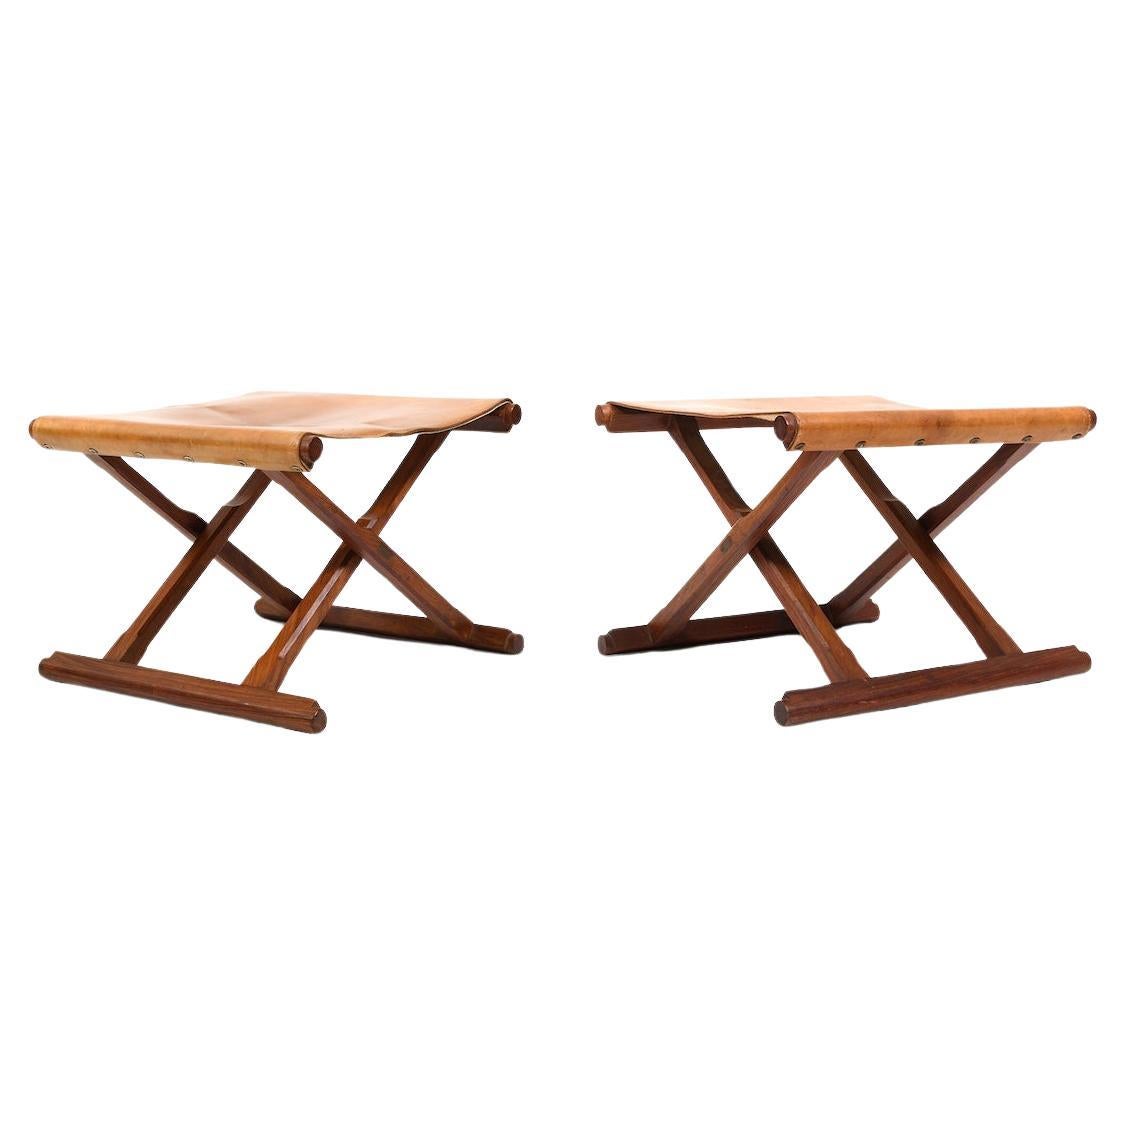 Pair of  Danish Folding Stools in Teak and Leather 1960s For Sale